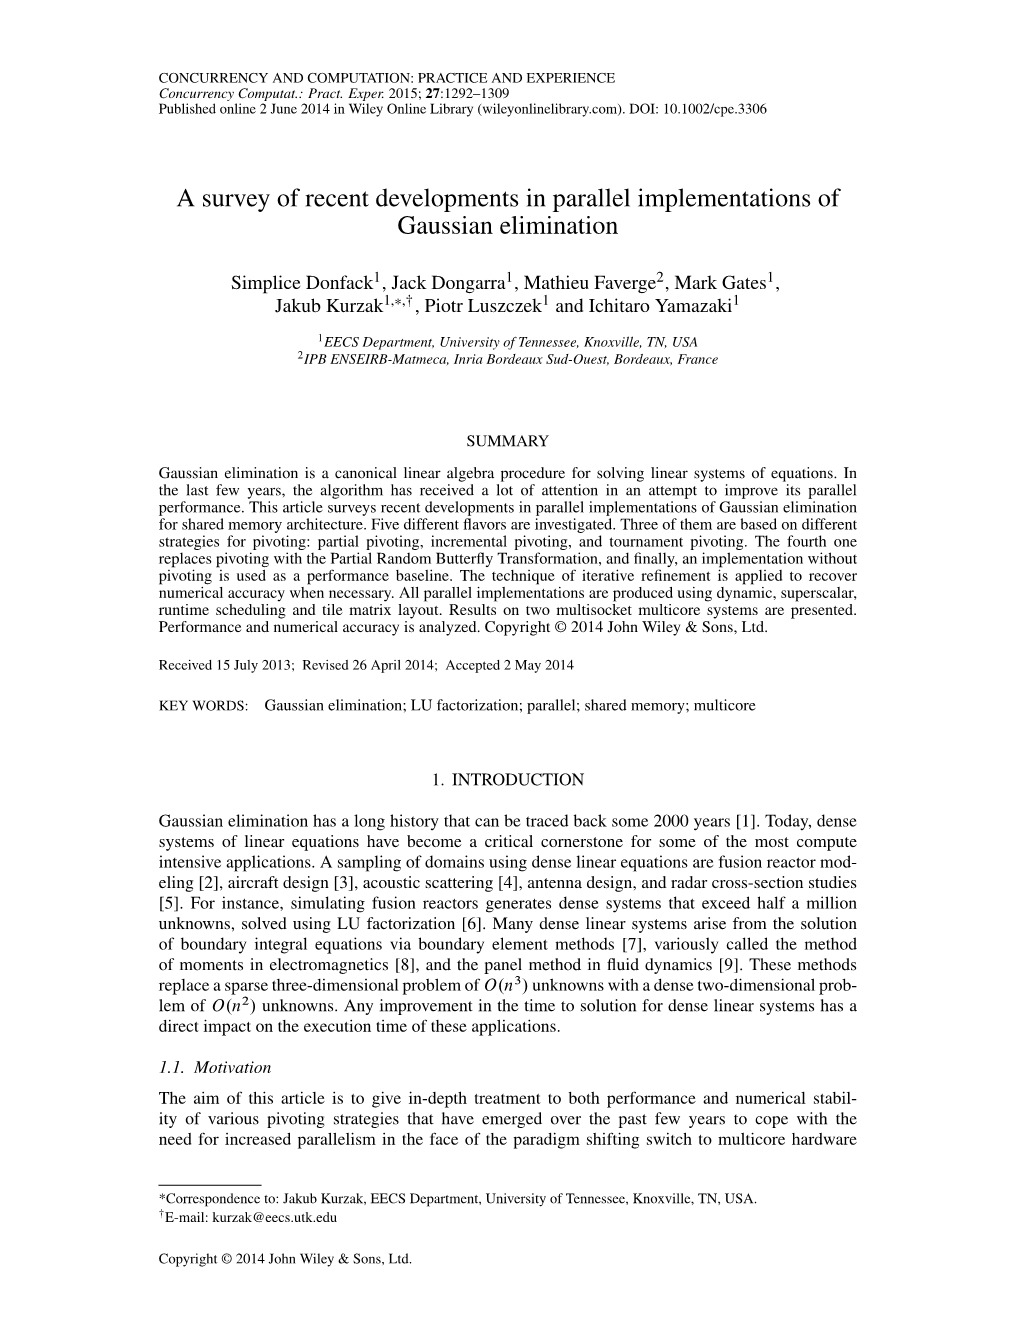 A Survey of Recent Developments in Parallel Implementations of Gaussian Elimination